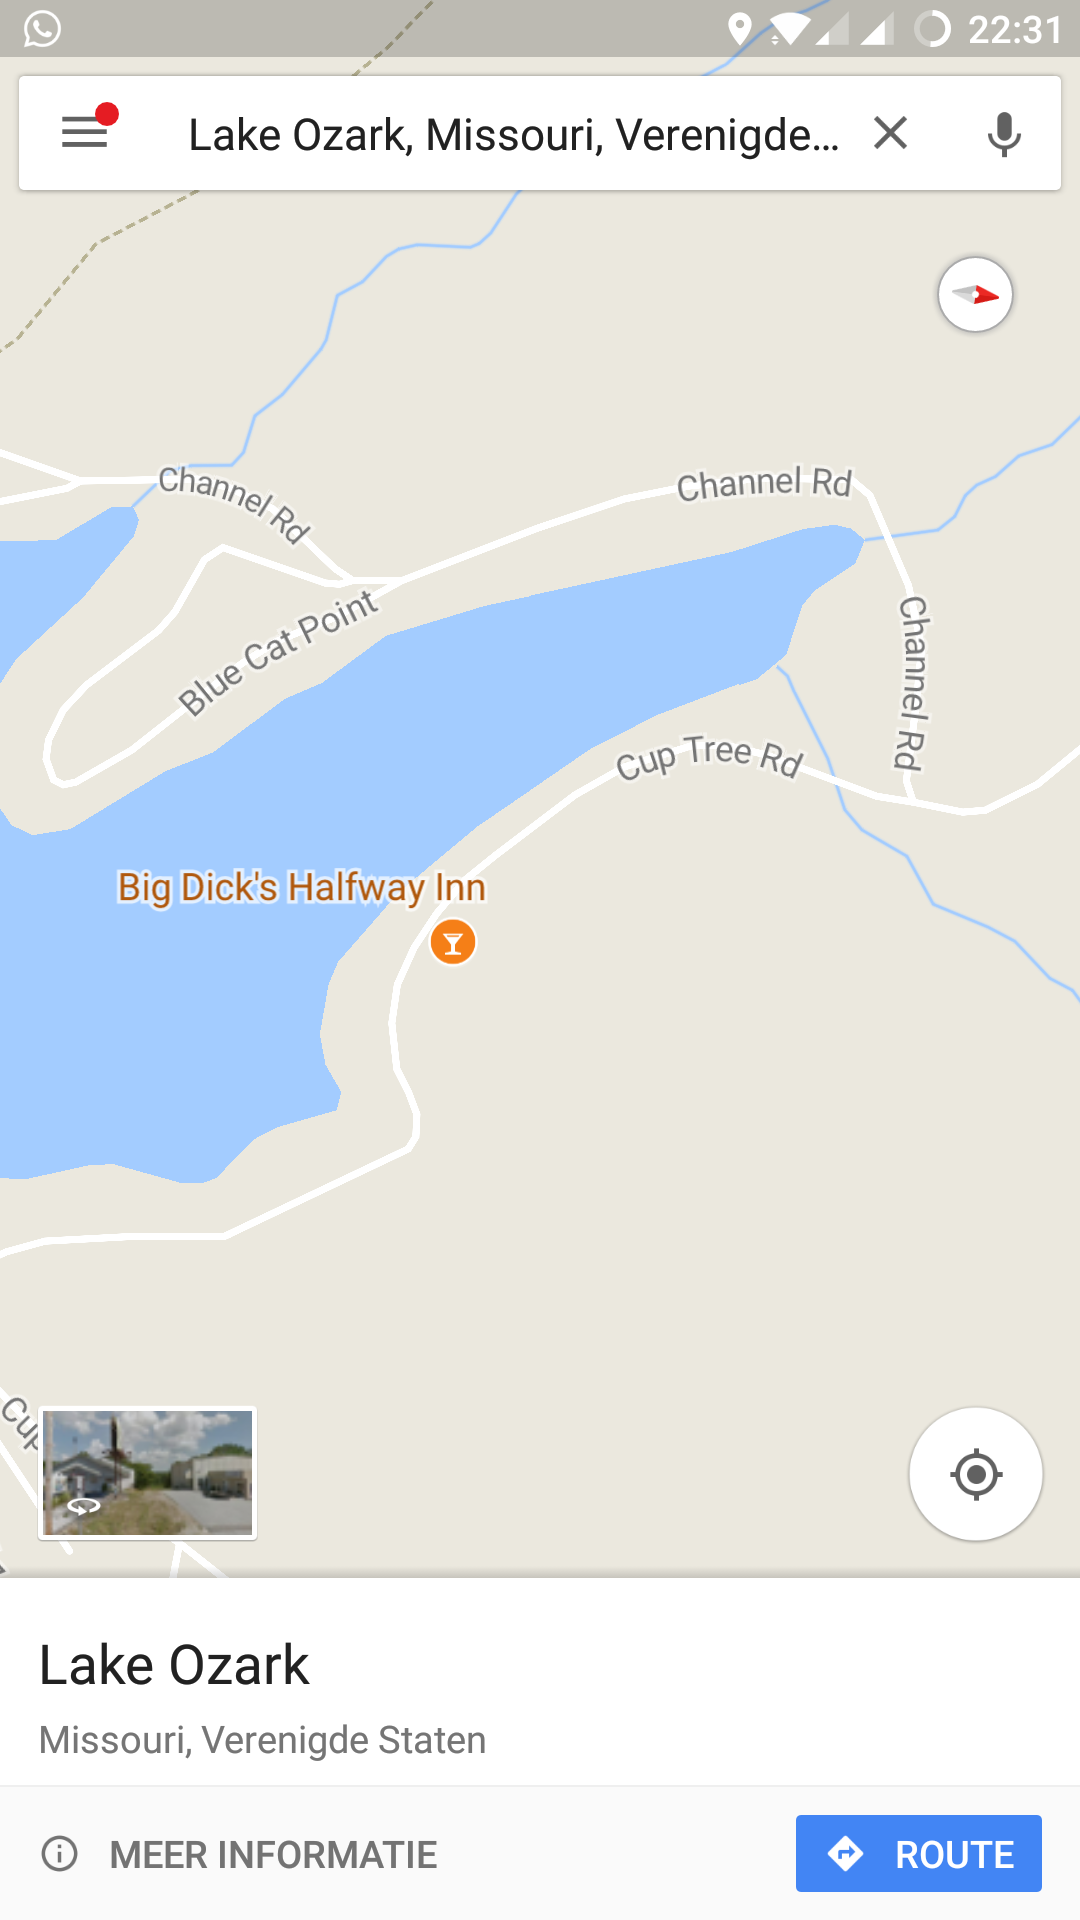 How can this be a real place